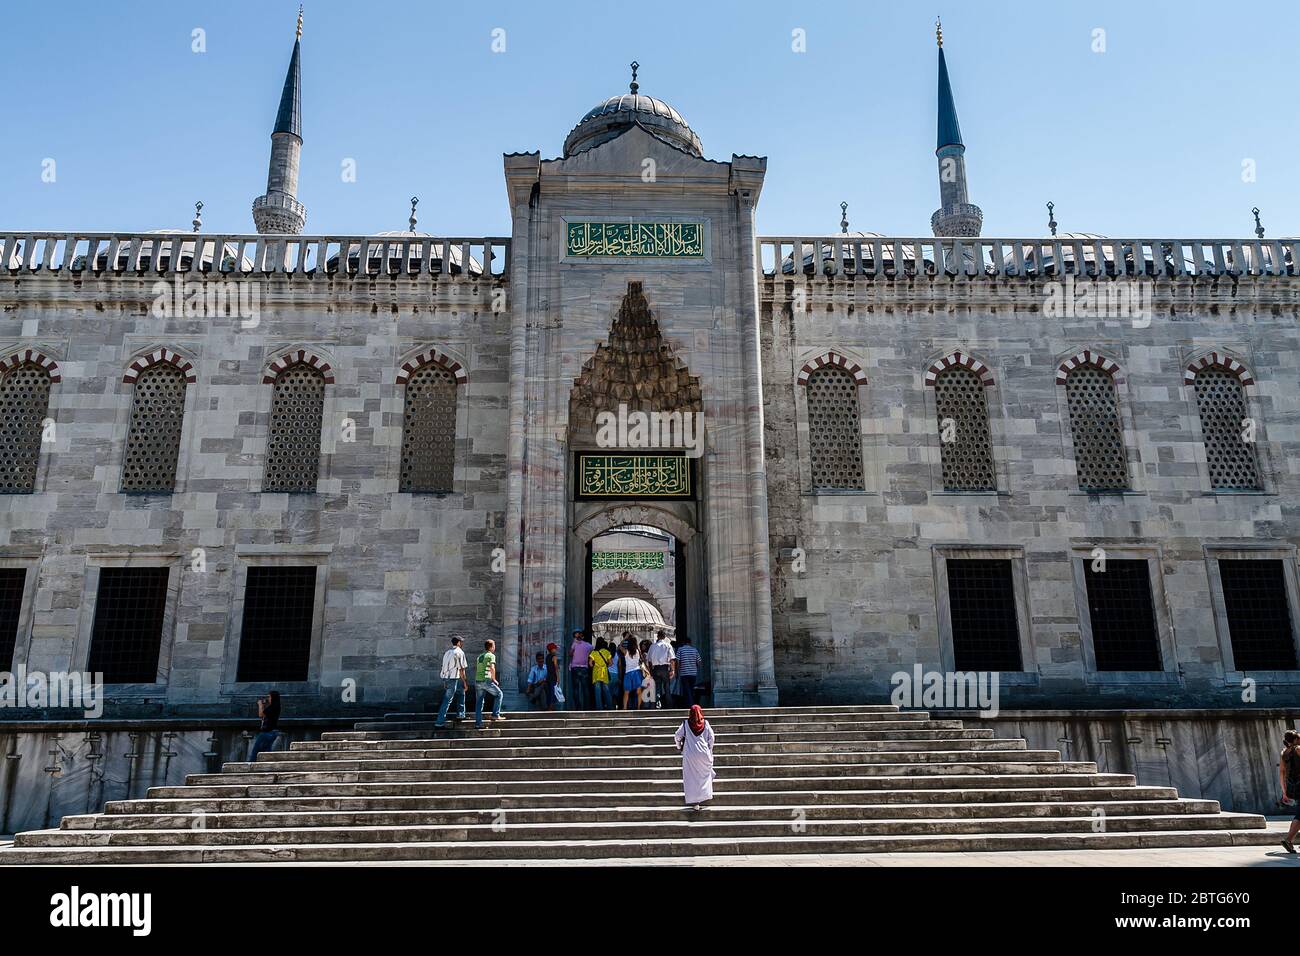 The entrance to Sultan Ahmed Mosque (Blue Mosque), Istanbul Stock Photo